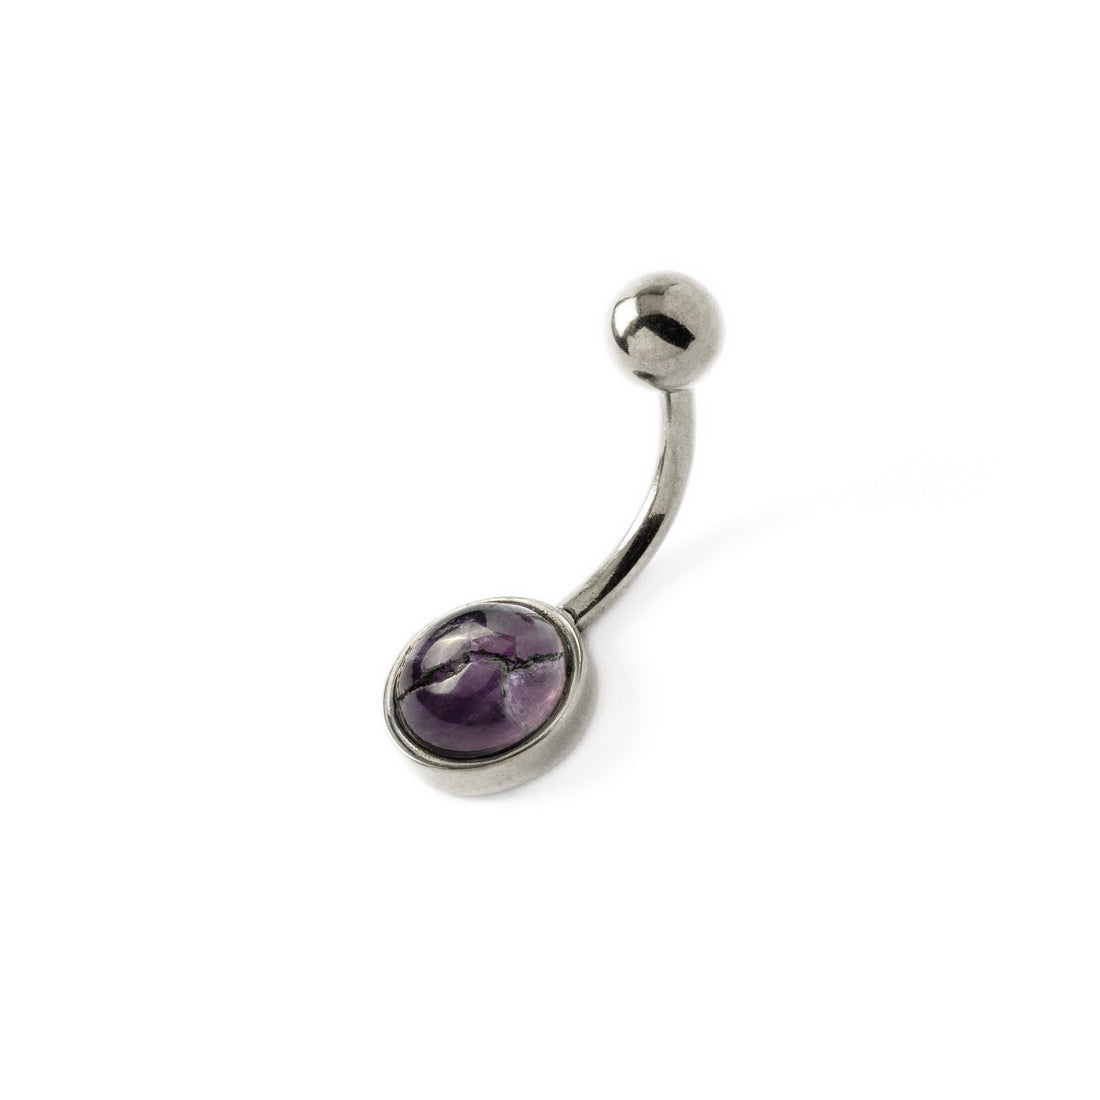 Steel Belly Bar with Amethyst right side view